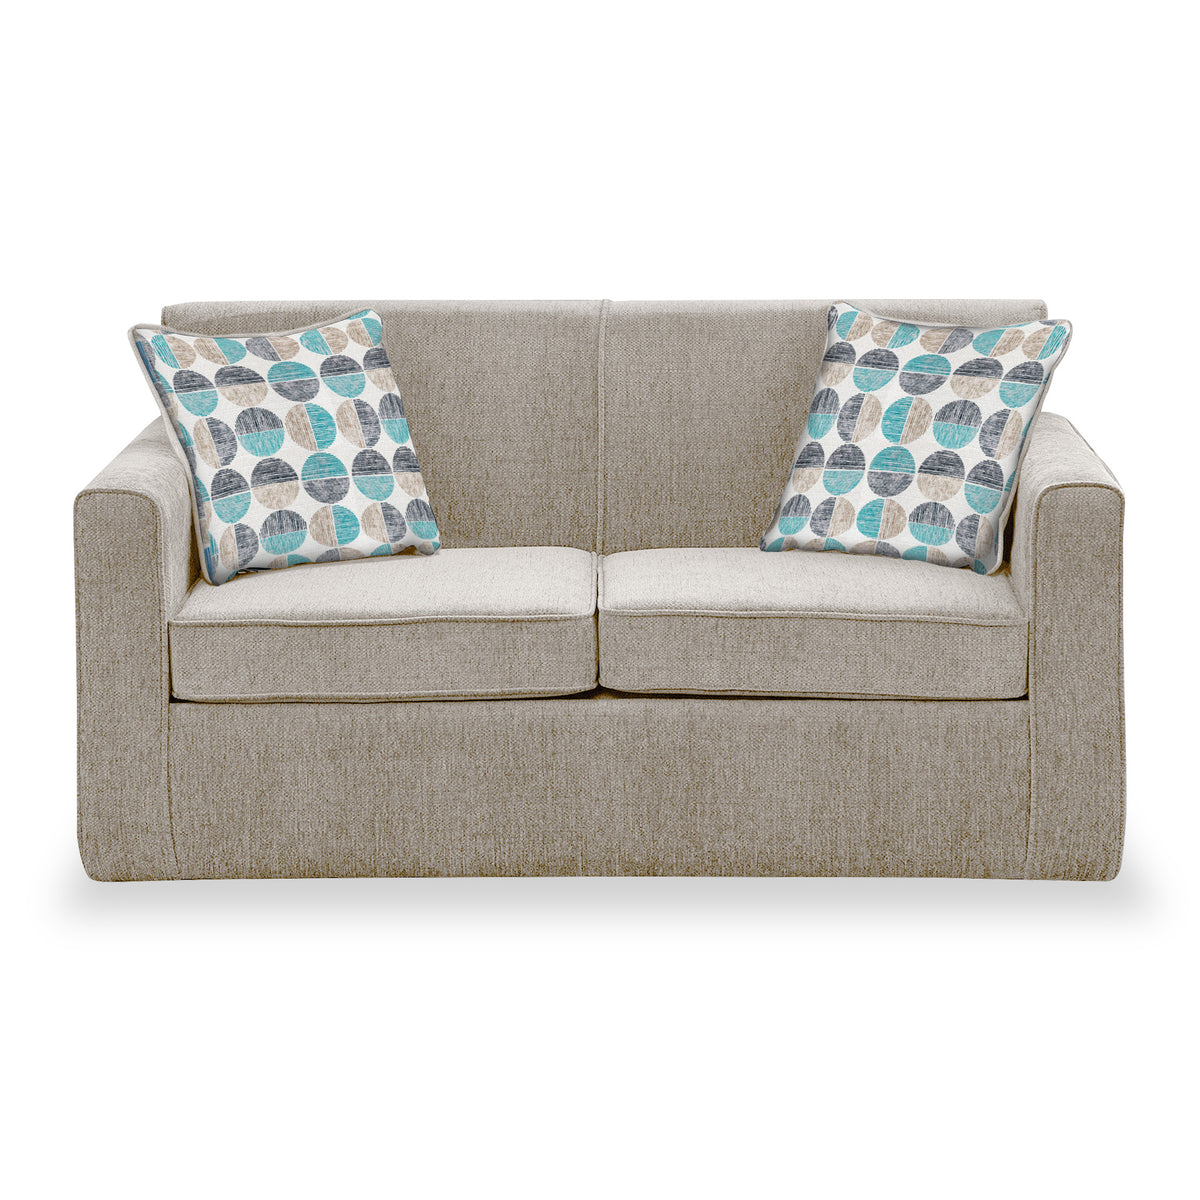 Welton Oatmeal Soft Weave 2 Seater Sofa Bed with Refus Duck Egg